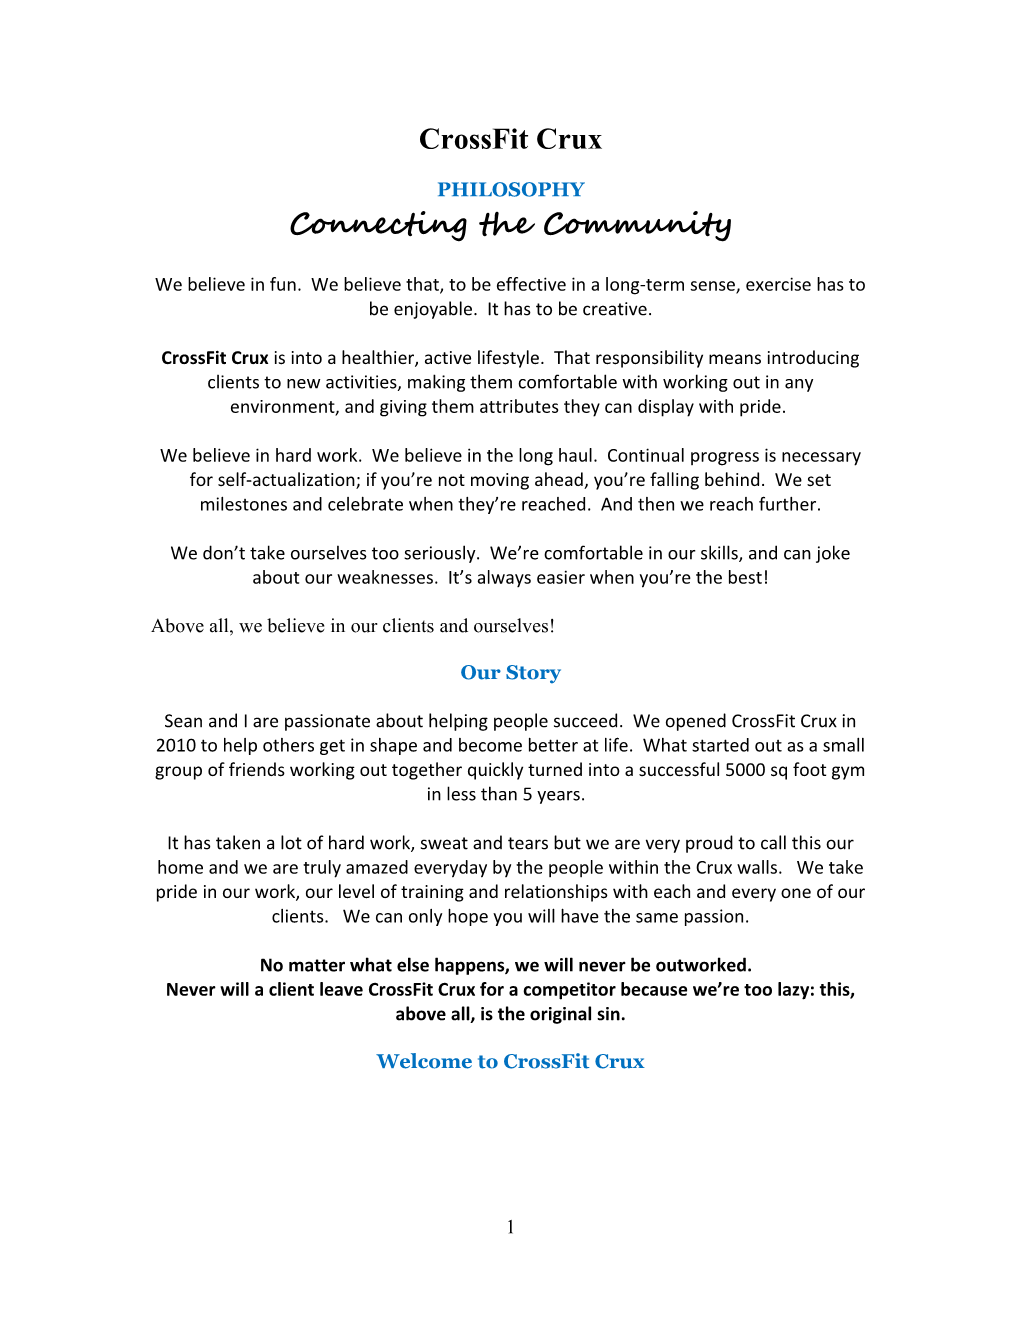 Connecting the Community